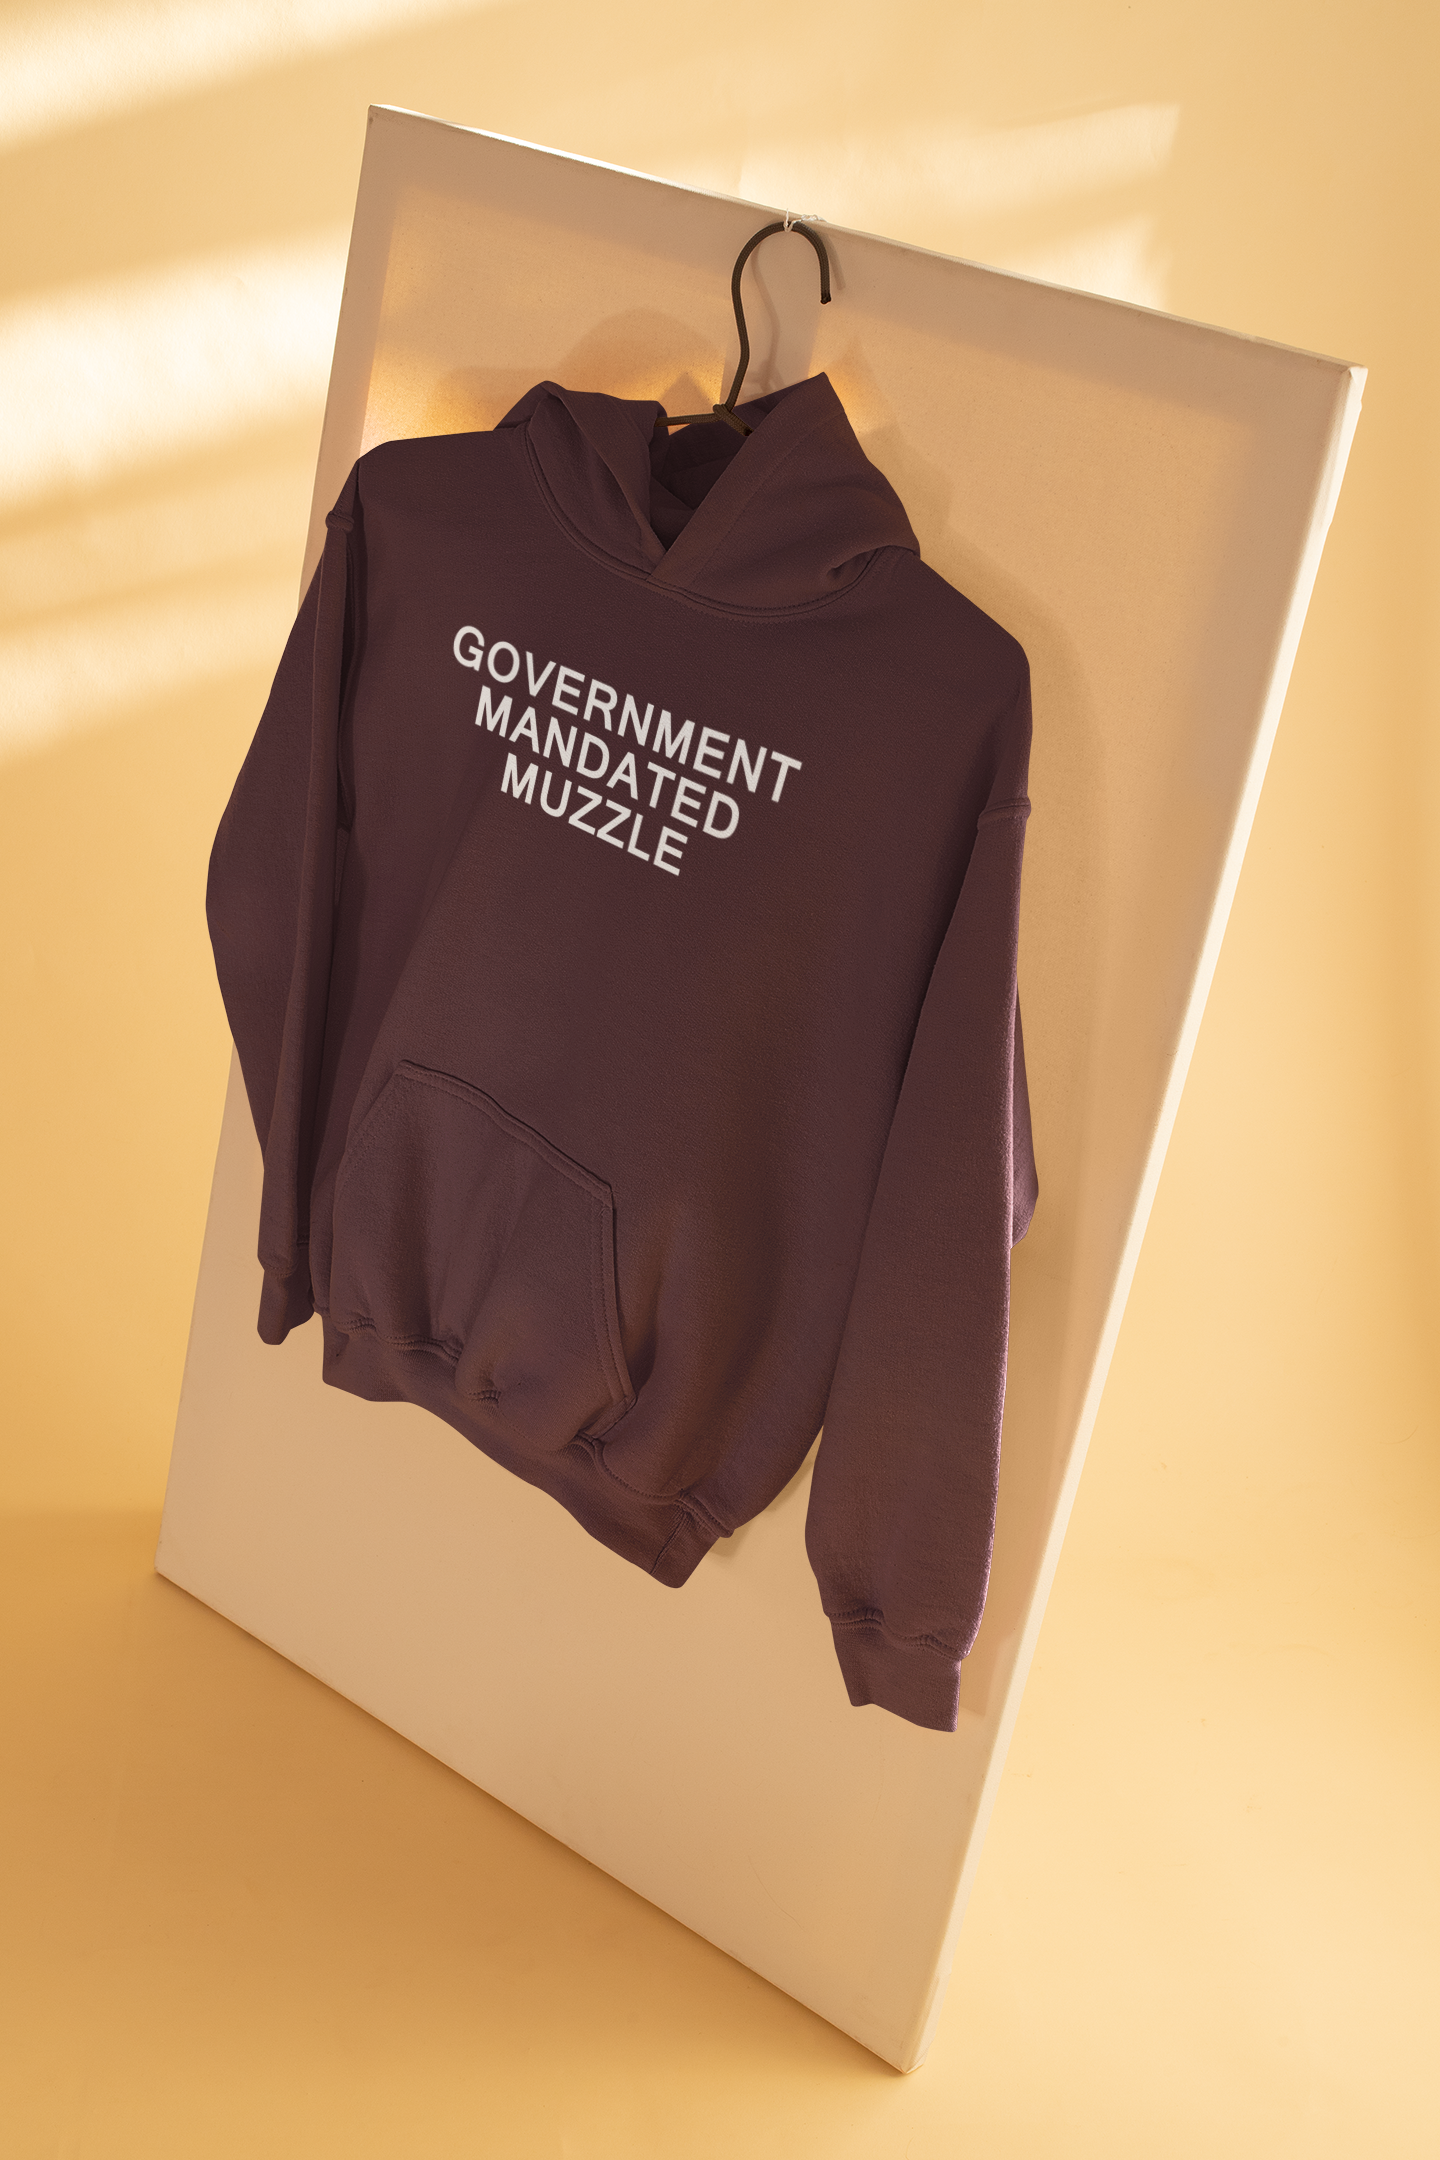 Government Mandated Muzzle Anti Government Hoodies for Women-FunkyTeesClub